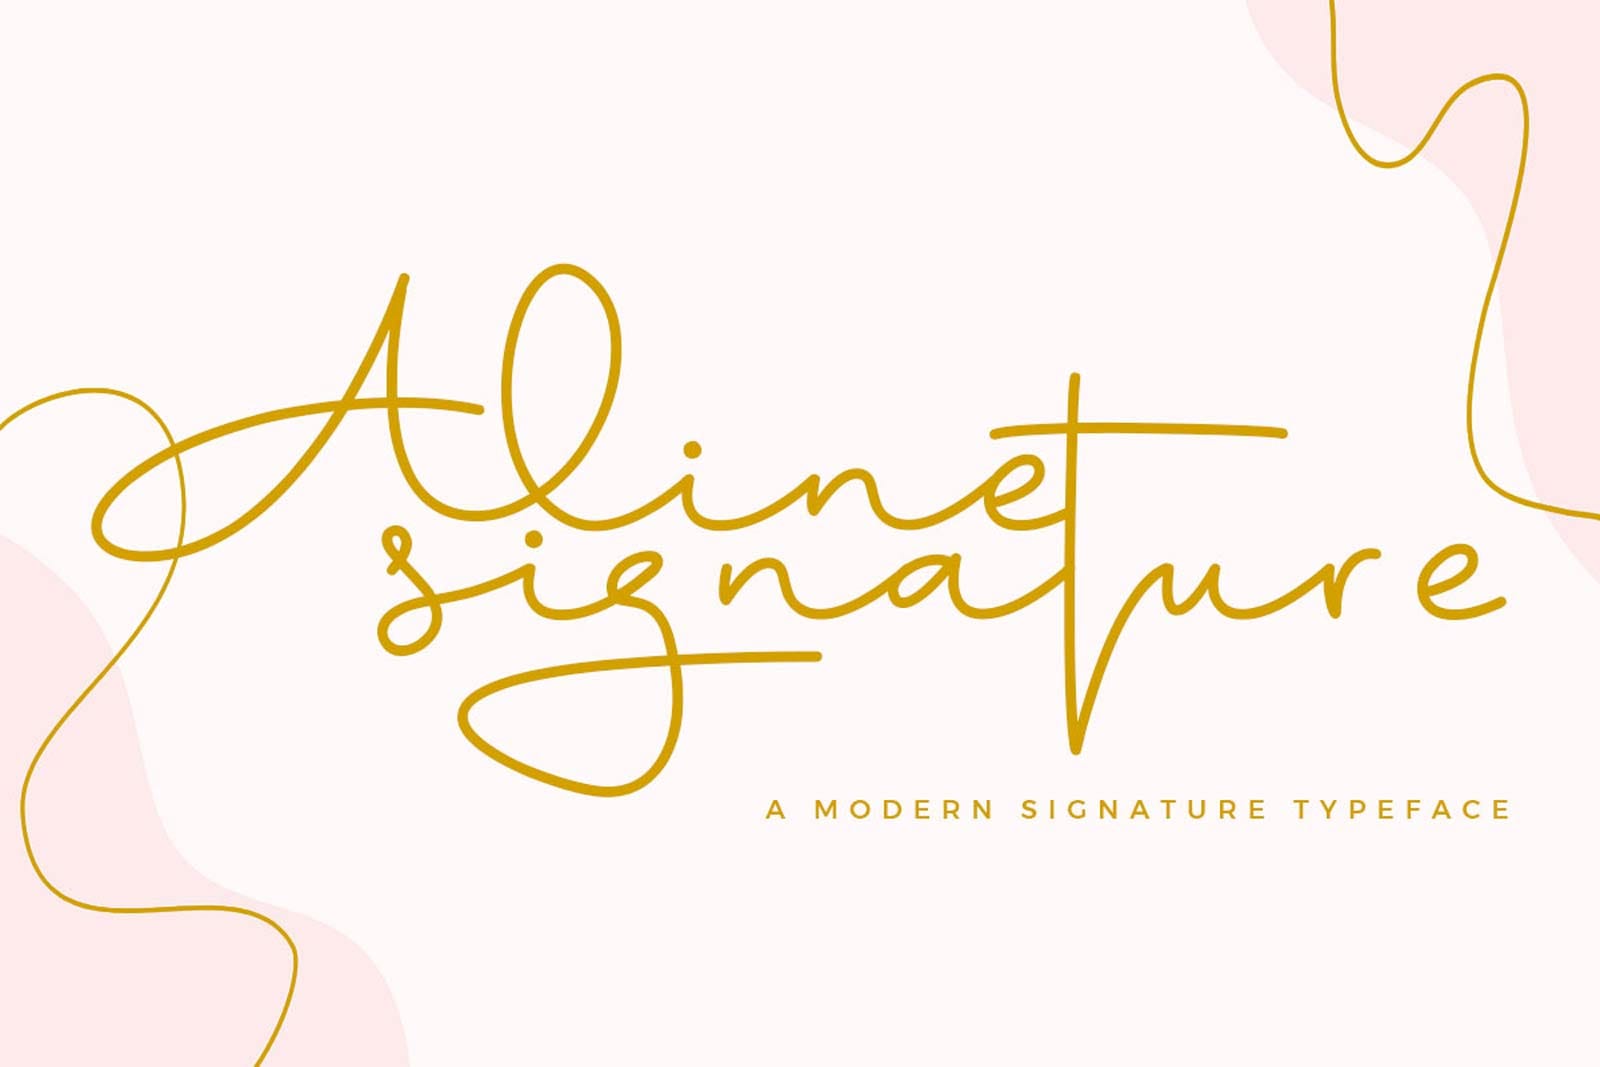 A free modern signature typeface